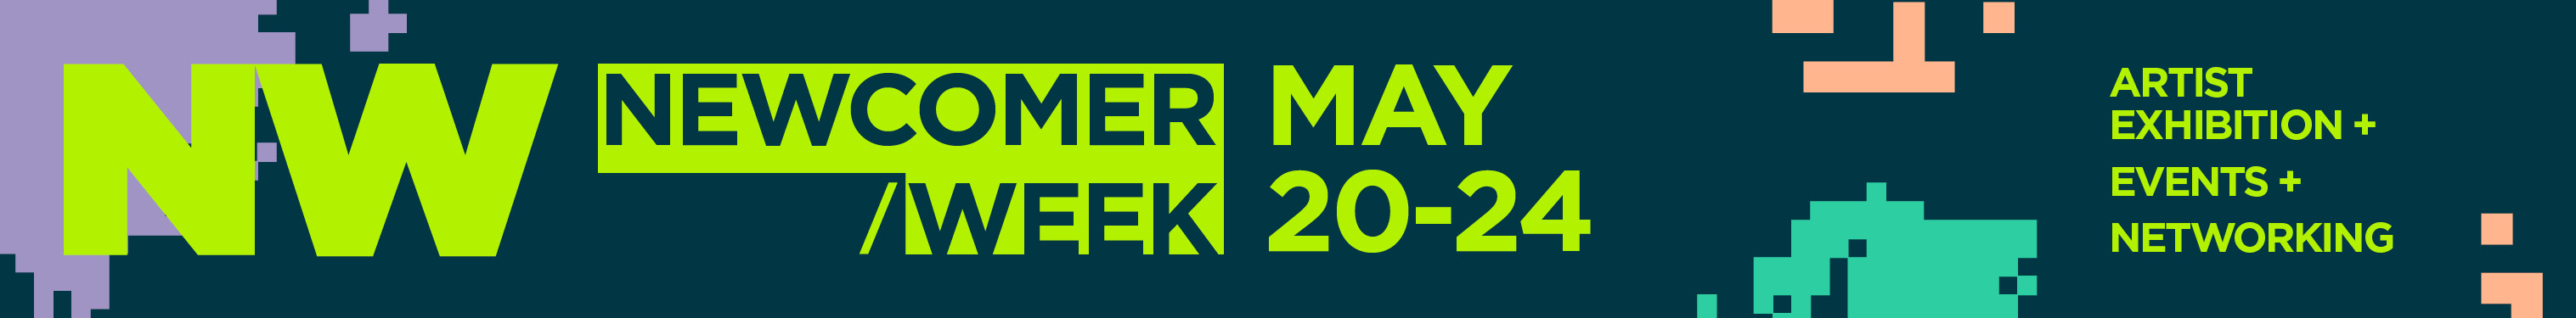 Newcomer Week" in lime green text stands out against a dark blue background with colorful, pixelated continents.